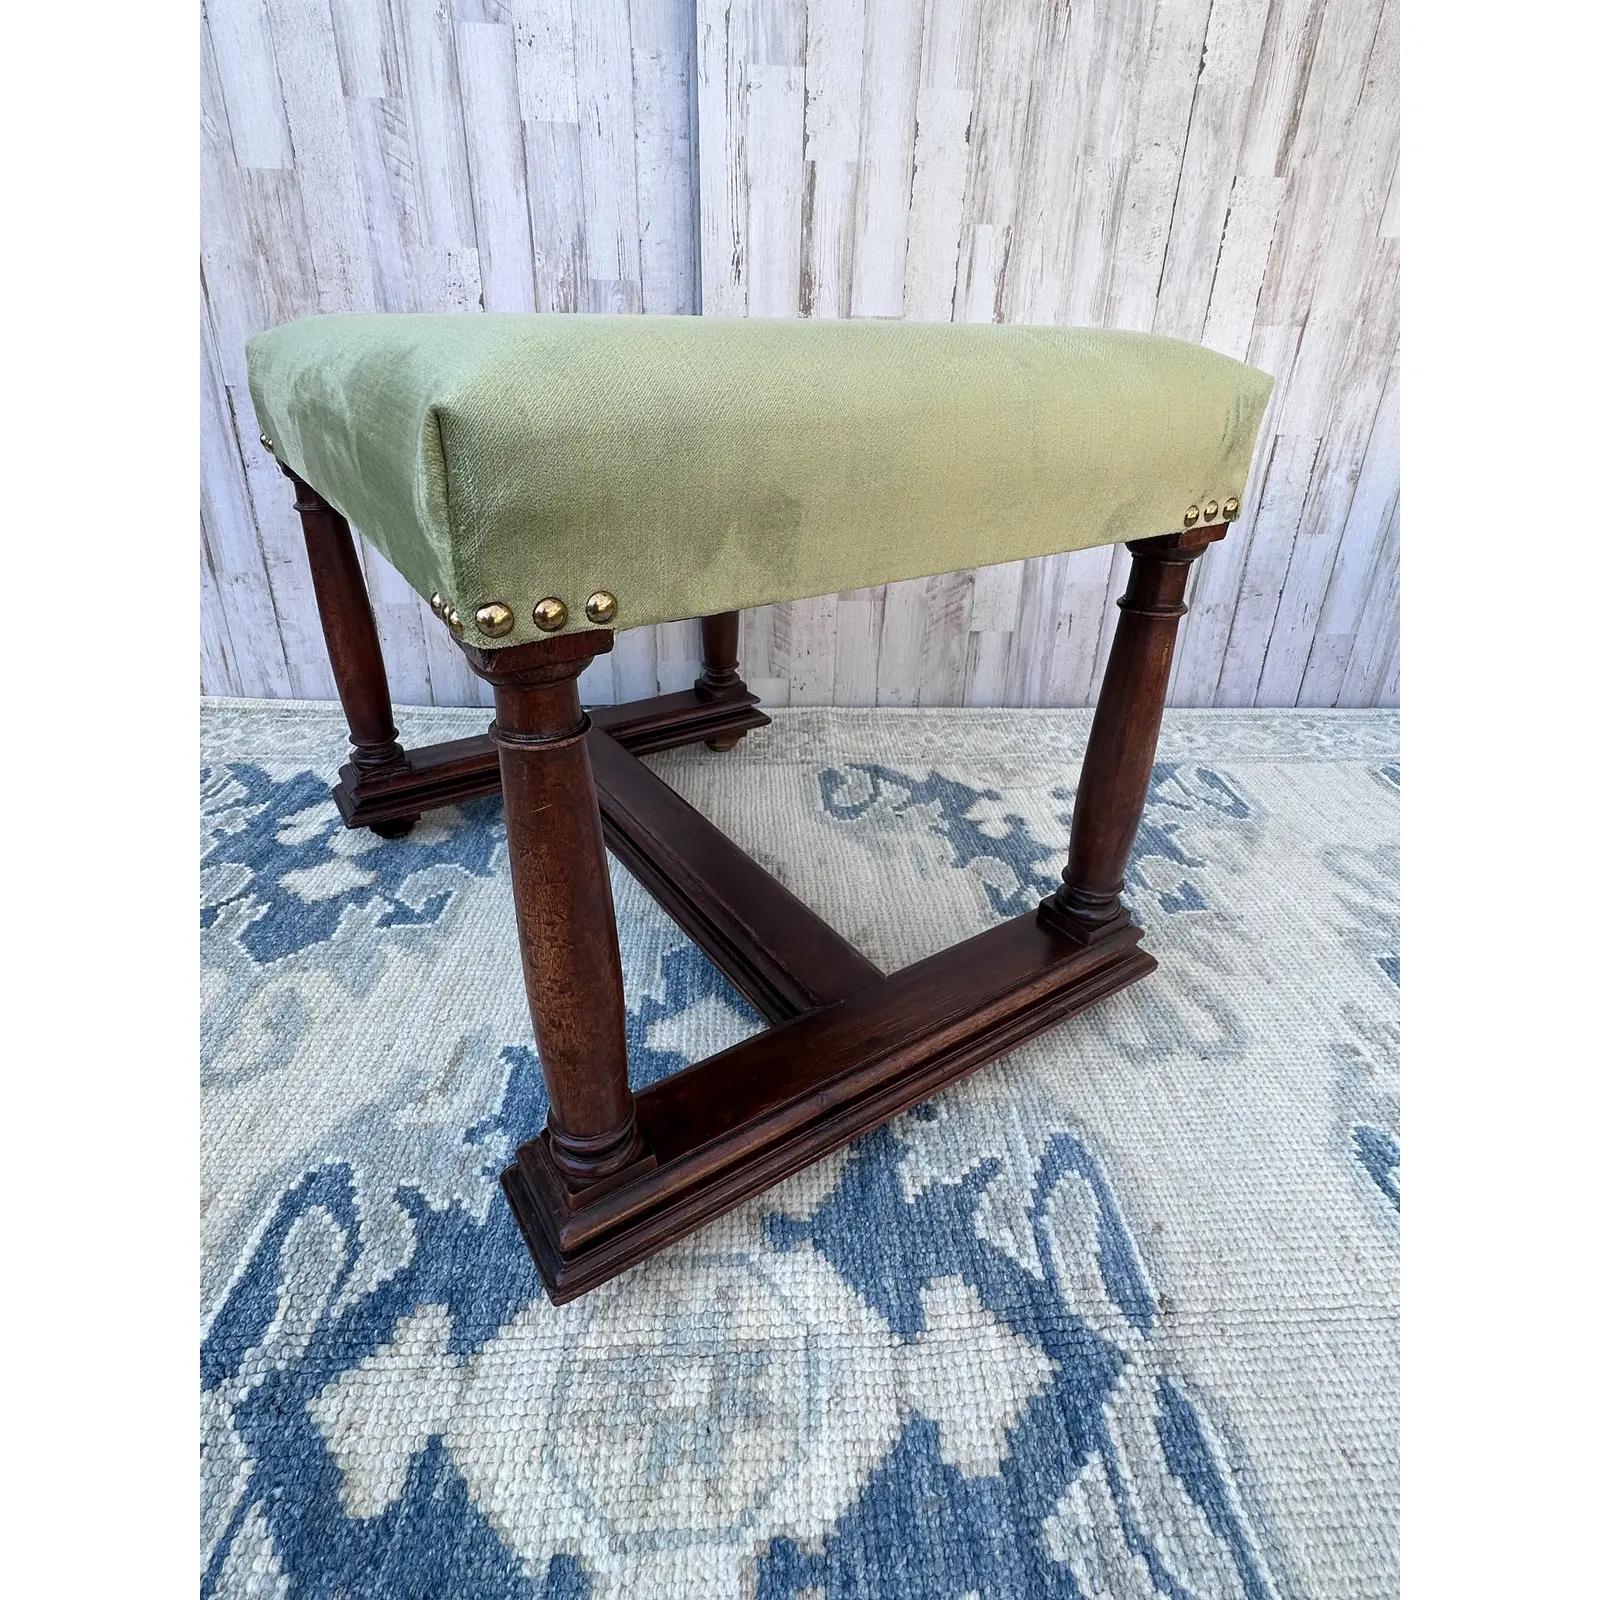 Newly Upholstered English Benches In Excellent Condition For Sale In Nashville, TN